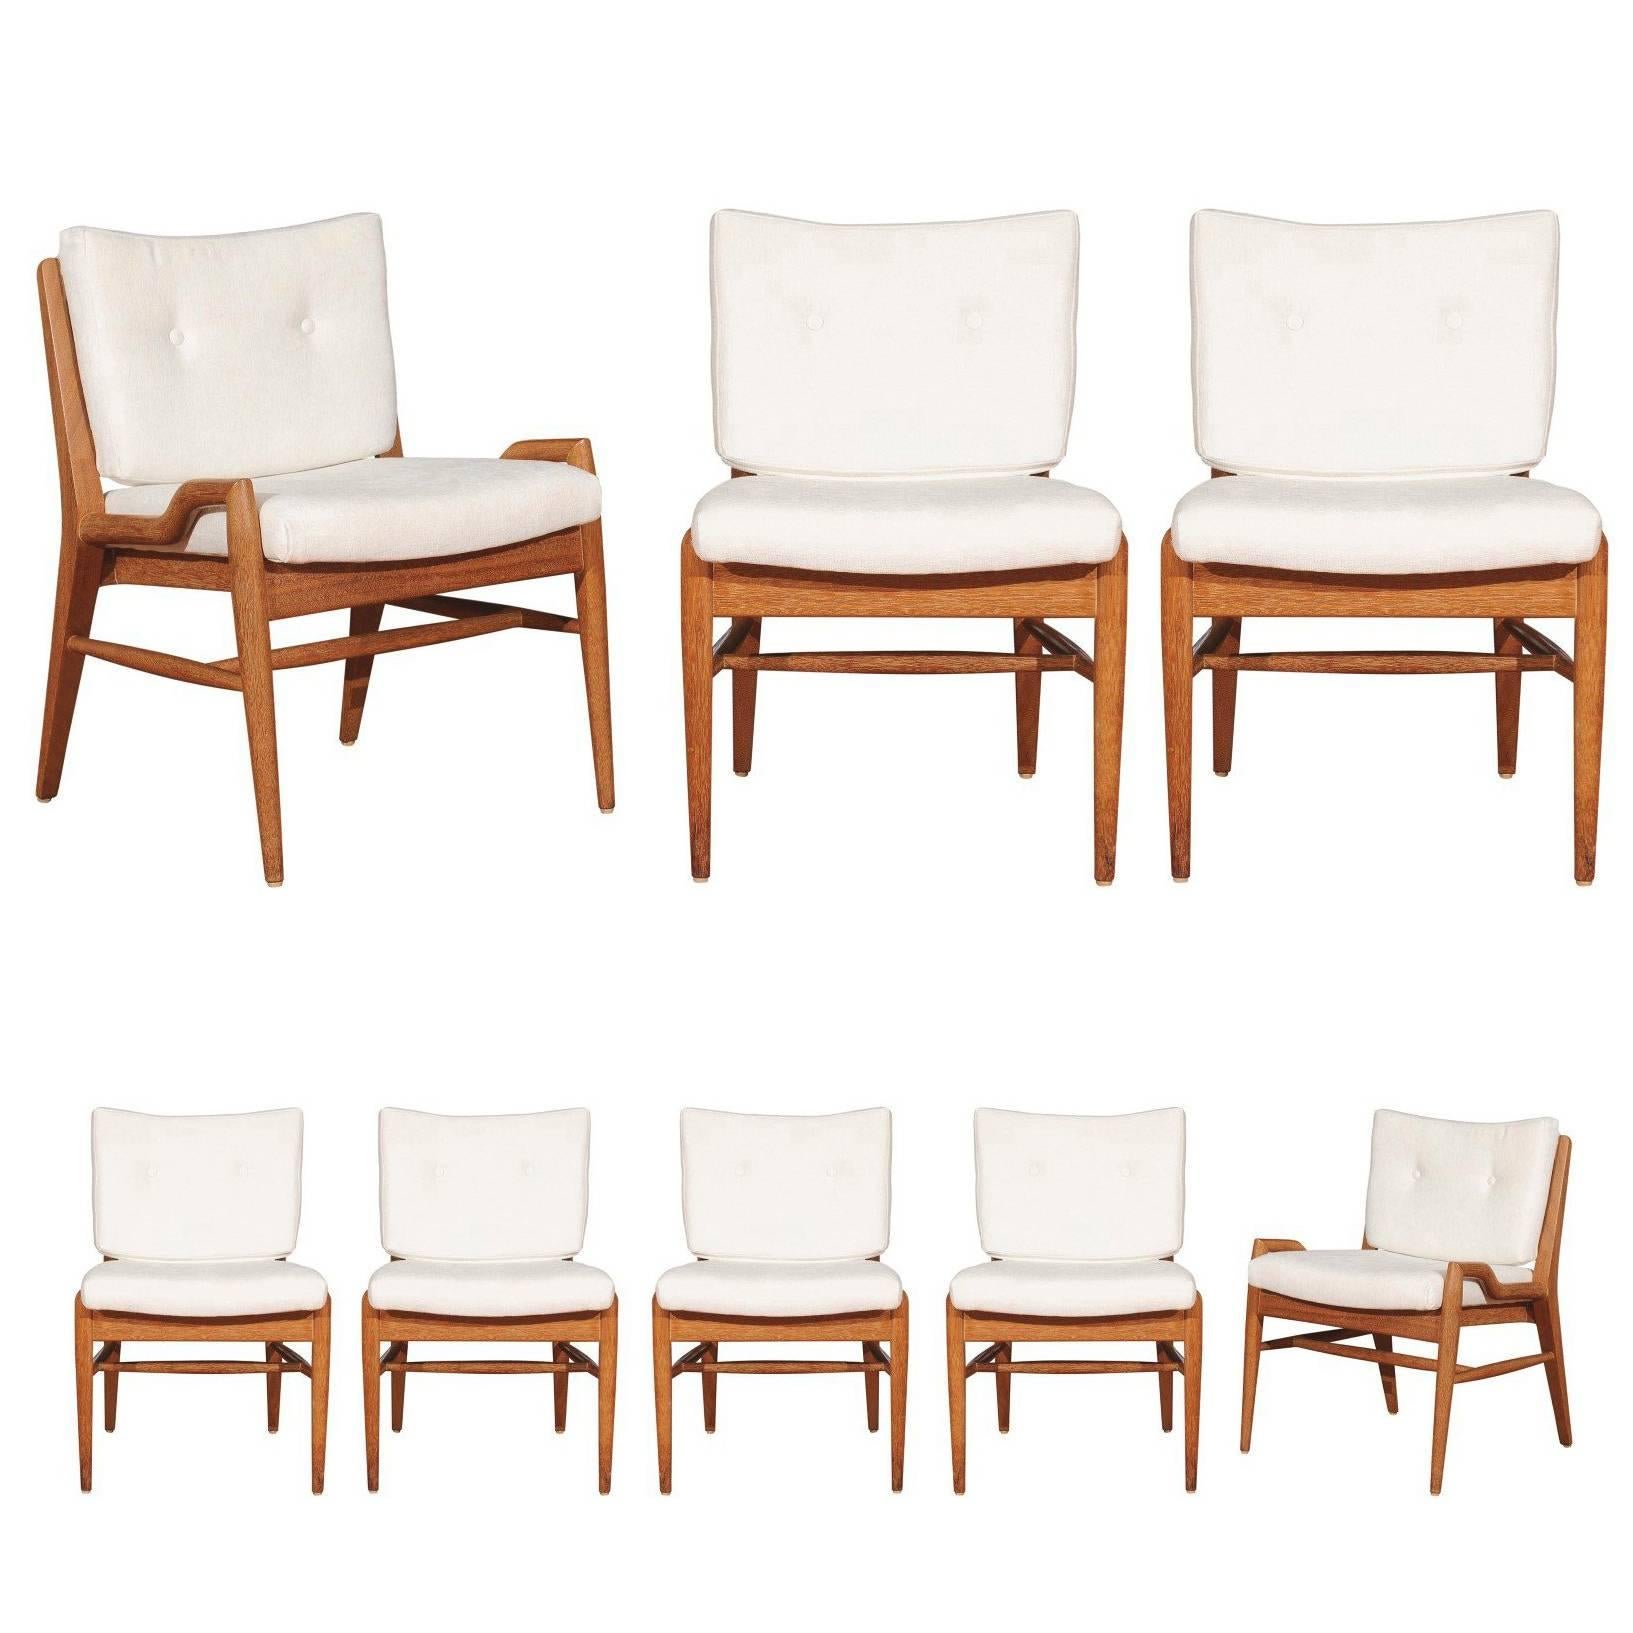 Chic Restored Set of 8 Cerused Mahogany Dining Chairs by John Keal, circa 1955